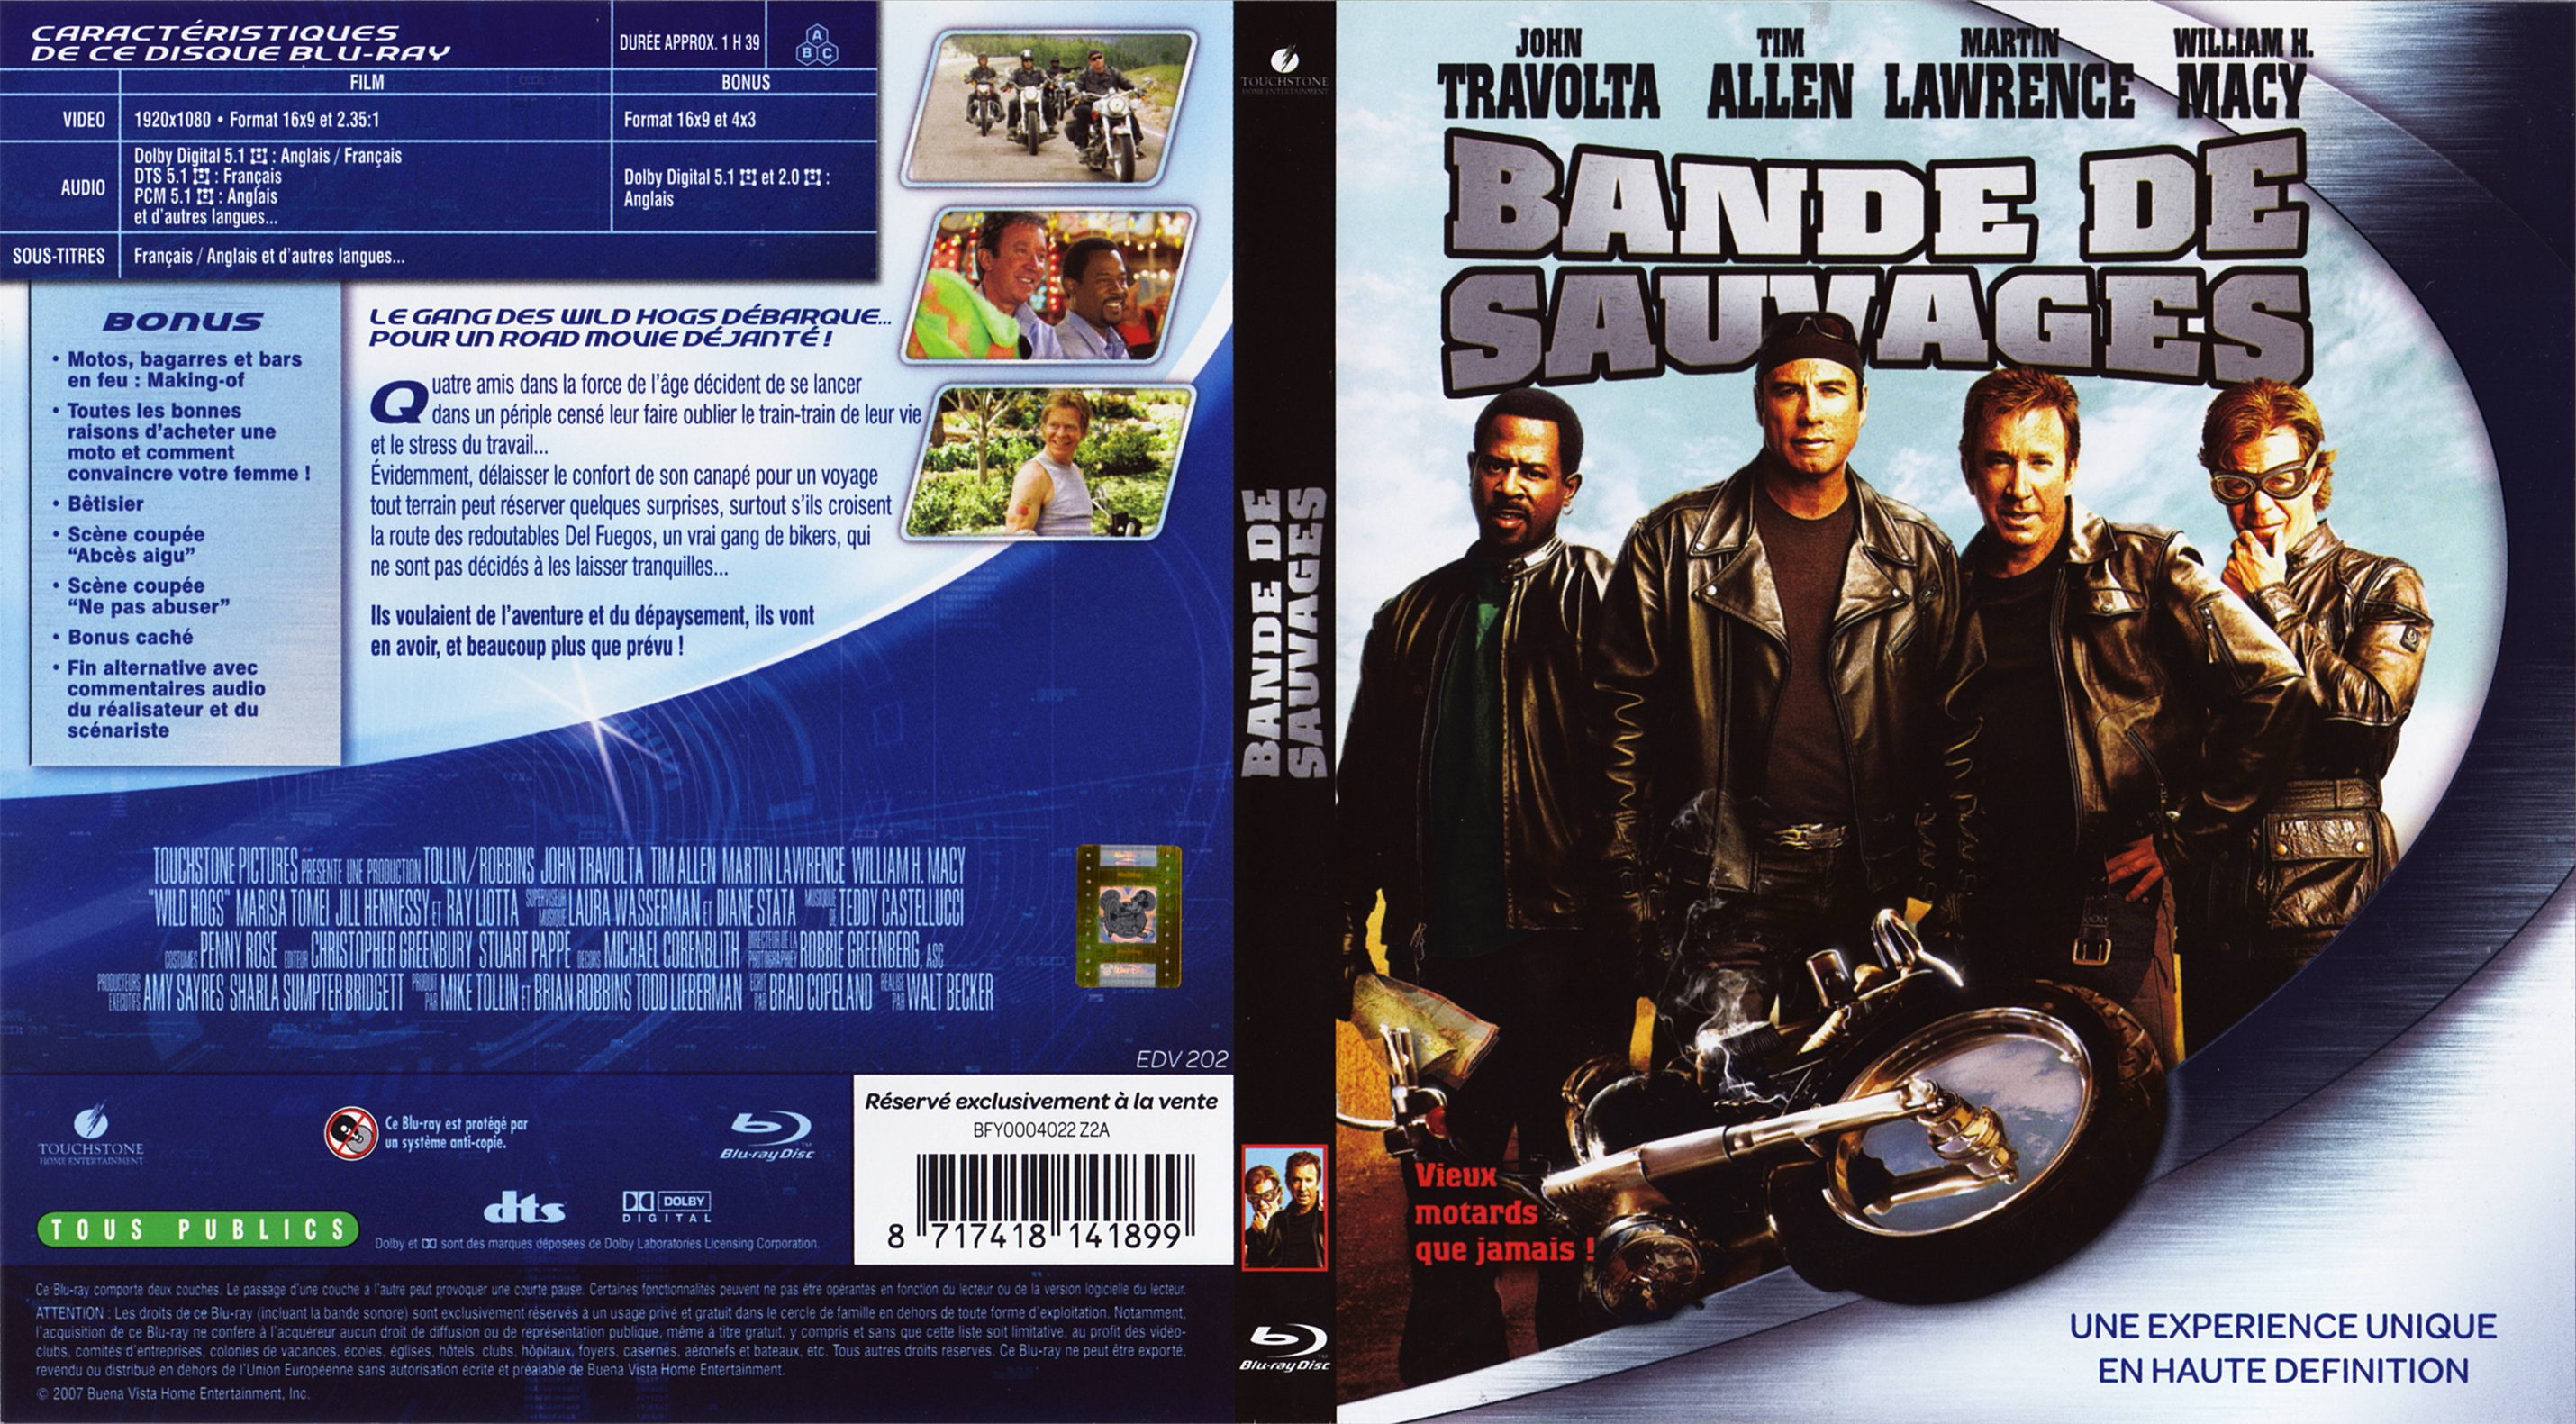 Jaquette DVD Bande de sauvages (BLU-RAY)